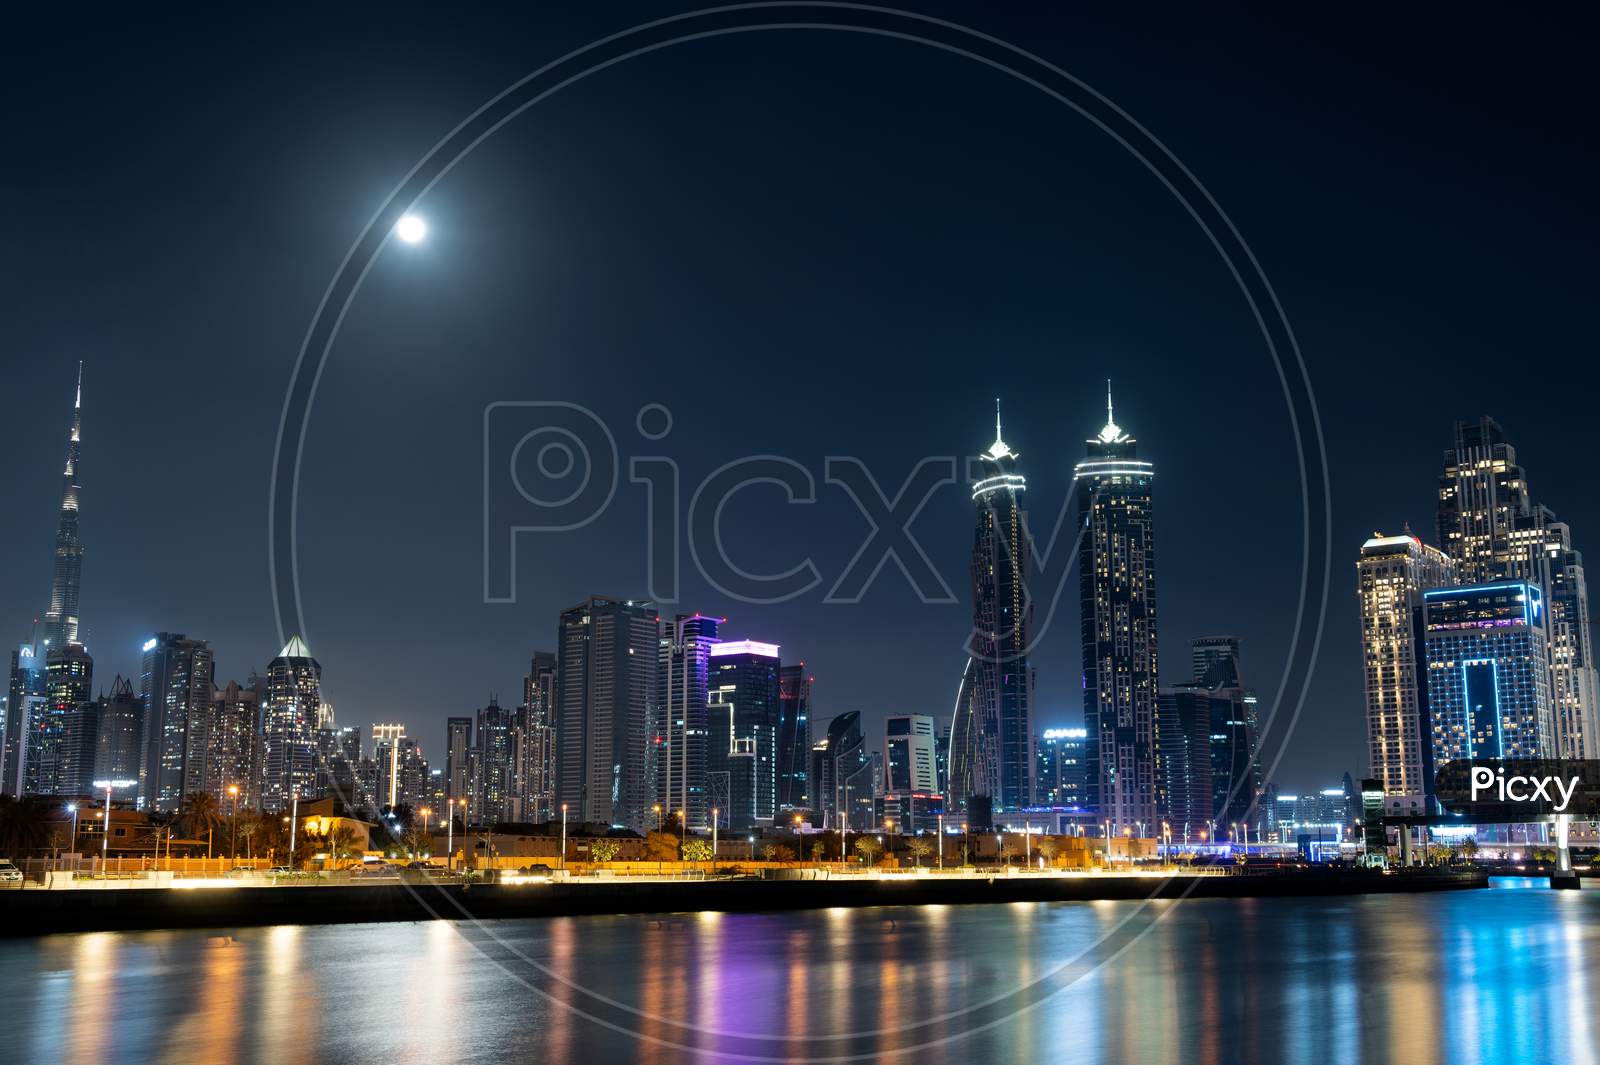 Feb 26Th , 2021 Dubai, Uae. Panoramic View Of The Illuminated Burj Khalifa With Other Skyscrapers Throwing Beautiful Reflections On Water Captured From The Dubai Canal Boardwalk, Dubai, Uae.